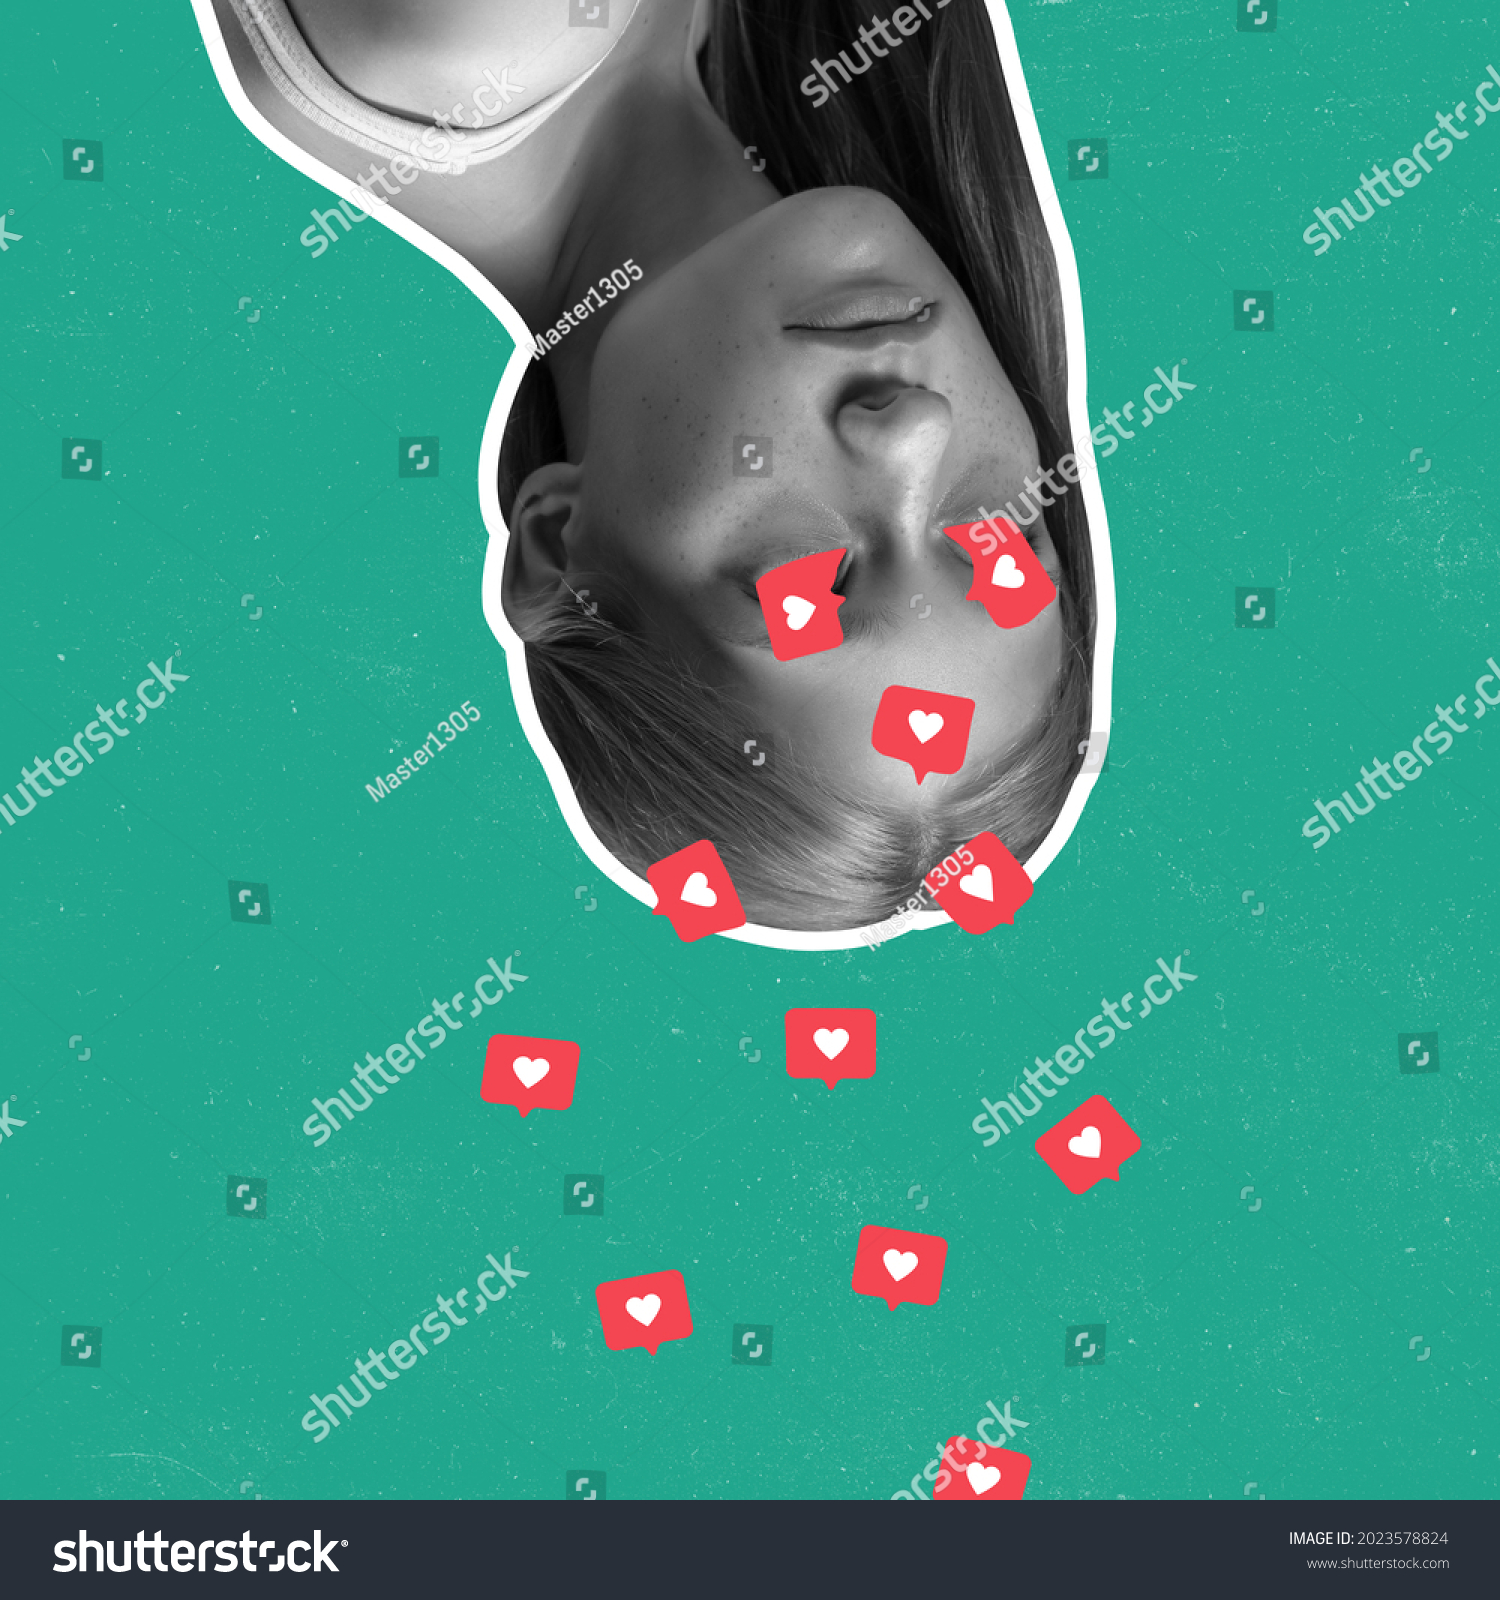 Life for likes. Contemporary art collage with girls and social media activity signs, likes icons, heart shapes over green background. Real youth modern lifestyle, internet addiction, gadgets concept #2023578824